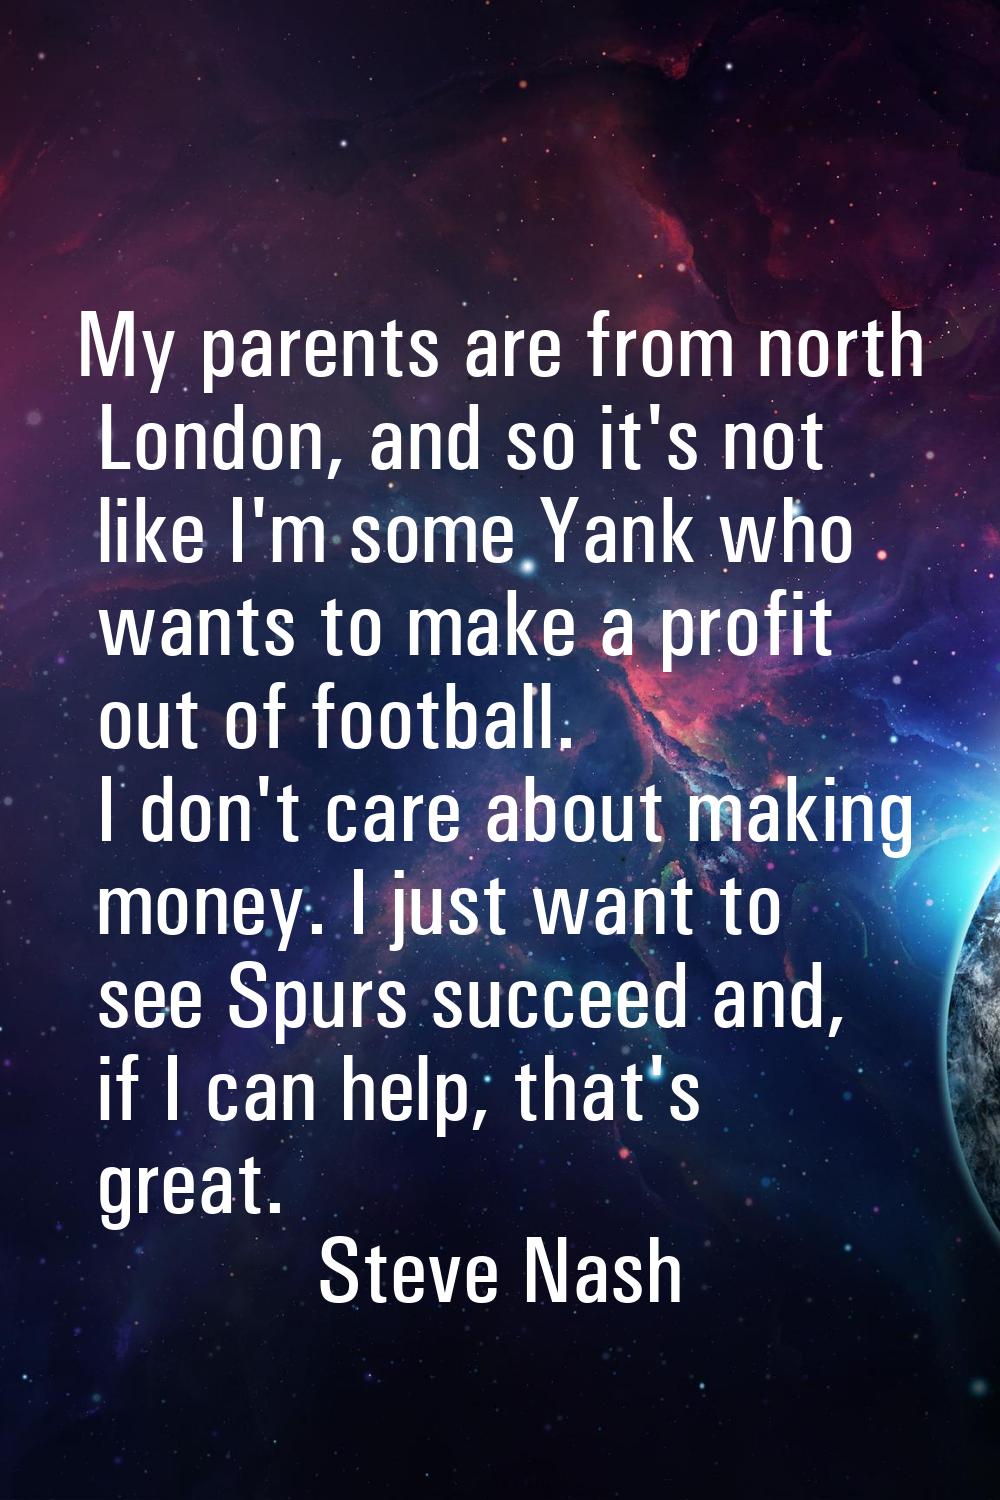 My parents are from north London, and so it's not like I'm some Yank who wants to make a profit out